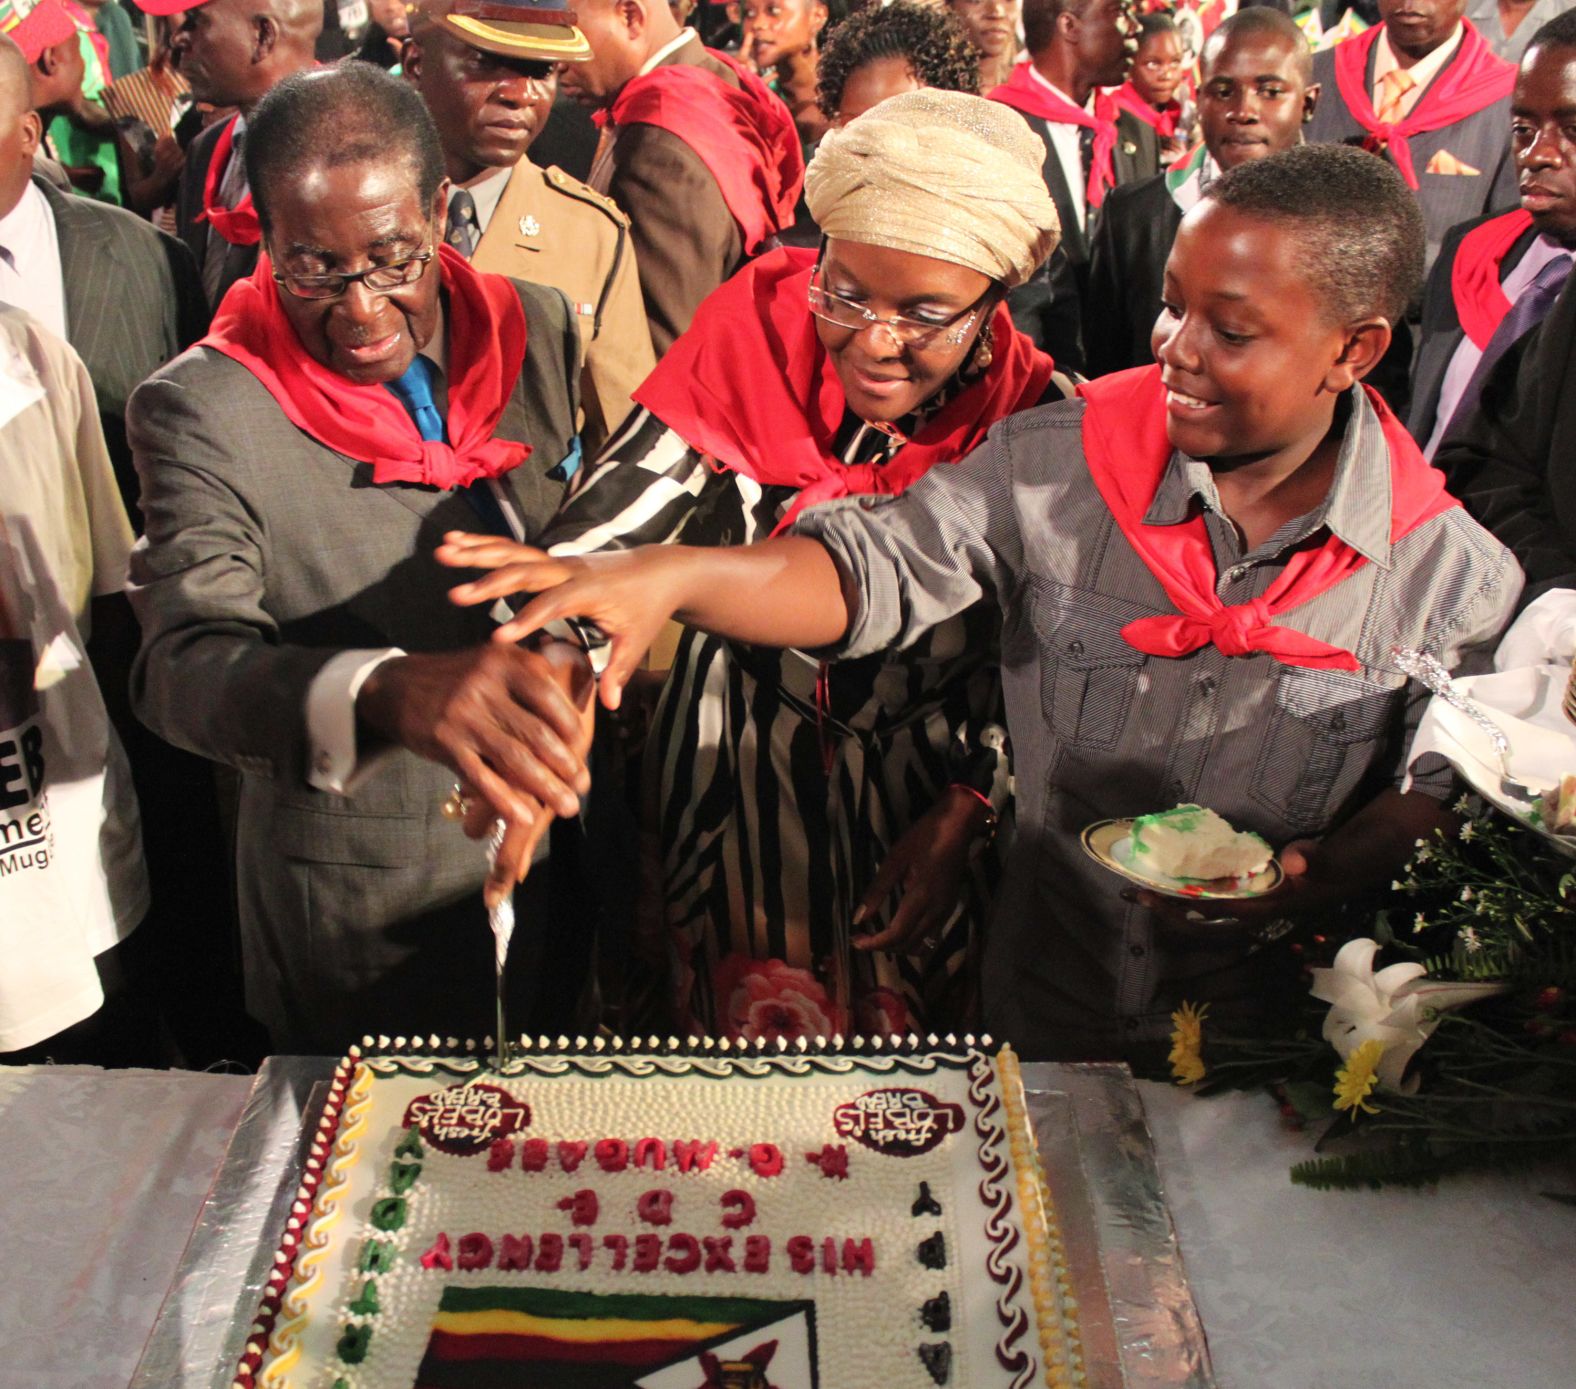 Mugabe cuts his birthday cake with his wife, Grace, and son Bellarmine Chatunga during celebrations in Harare in February 2011. Mugabe was turning 87.